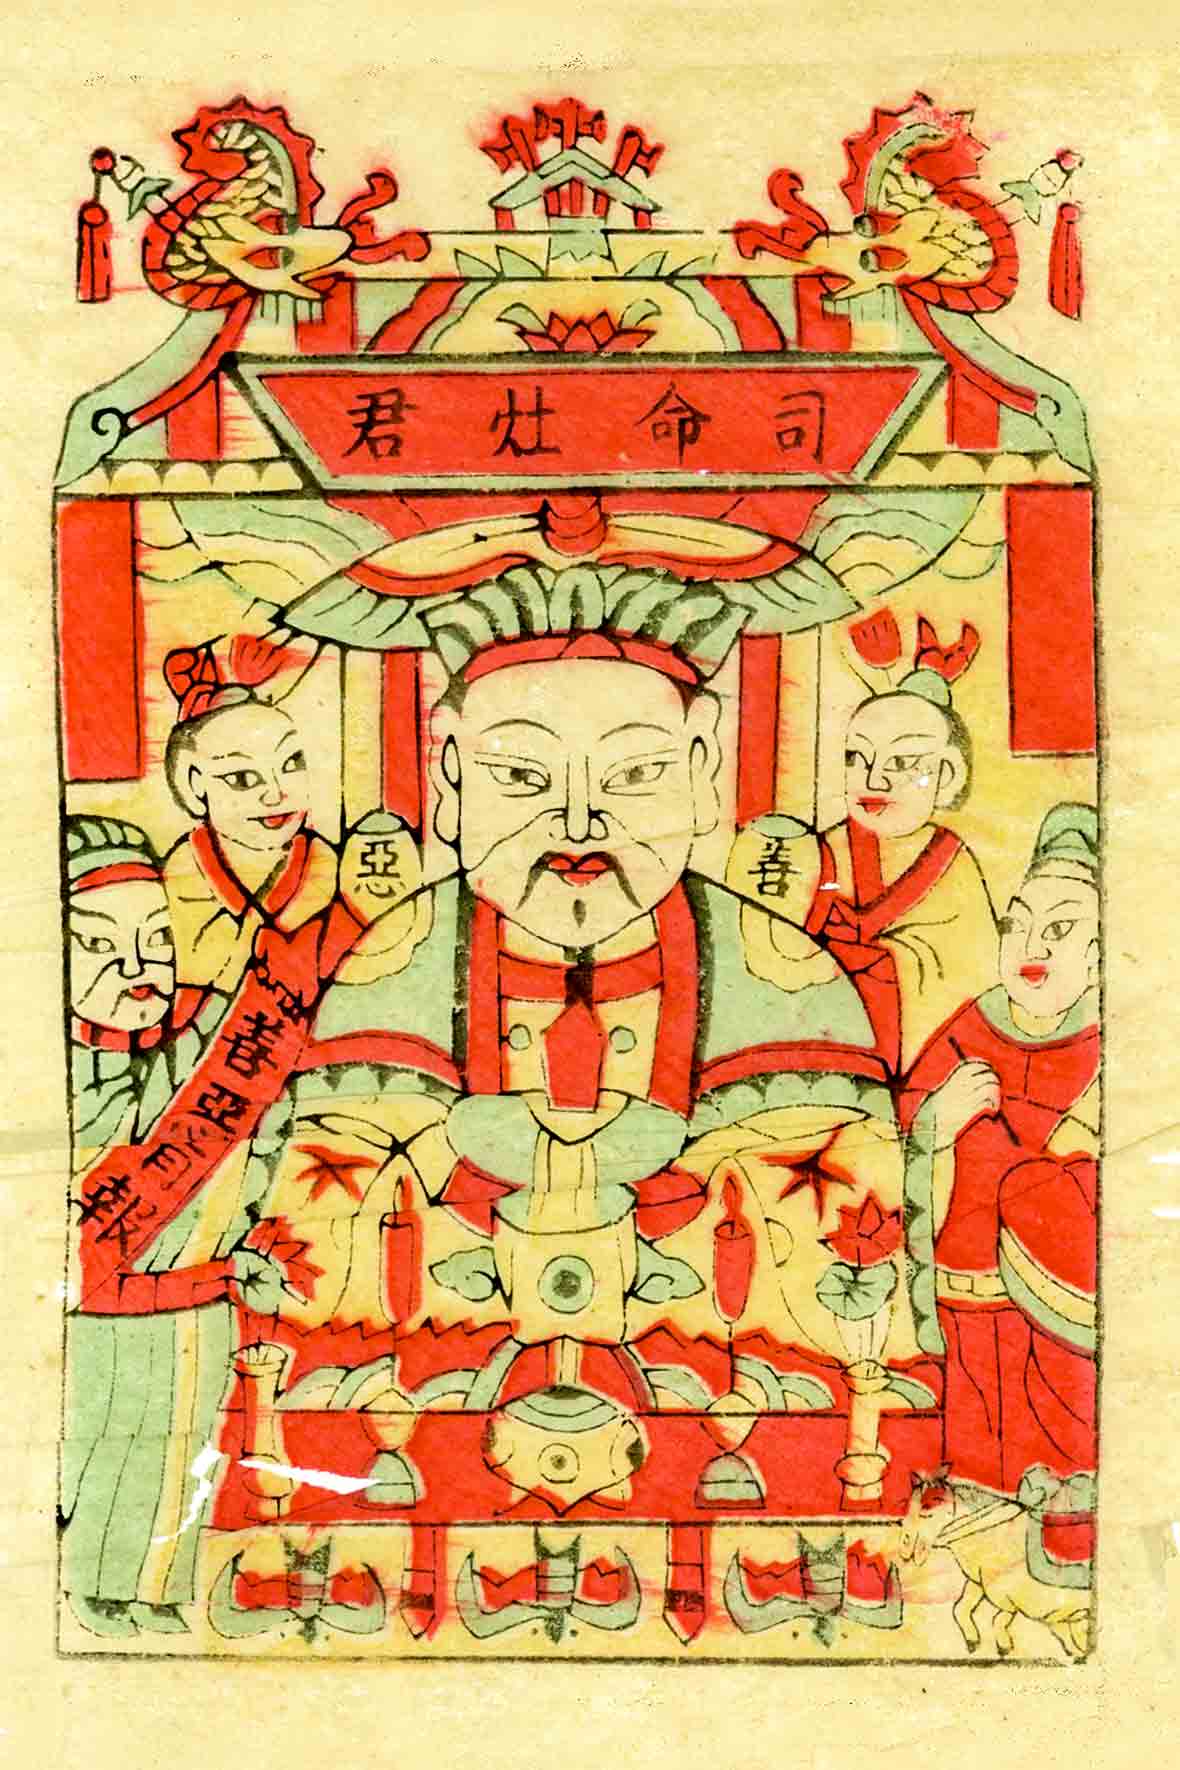 An illustration of a Chinese God in a temple for those in search of kitchen blessings.